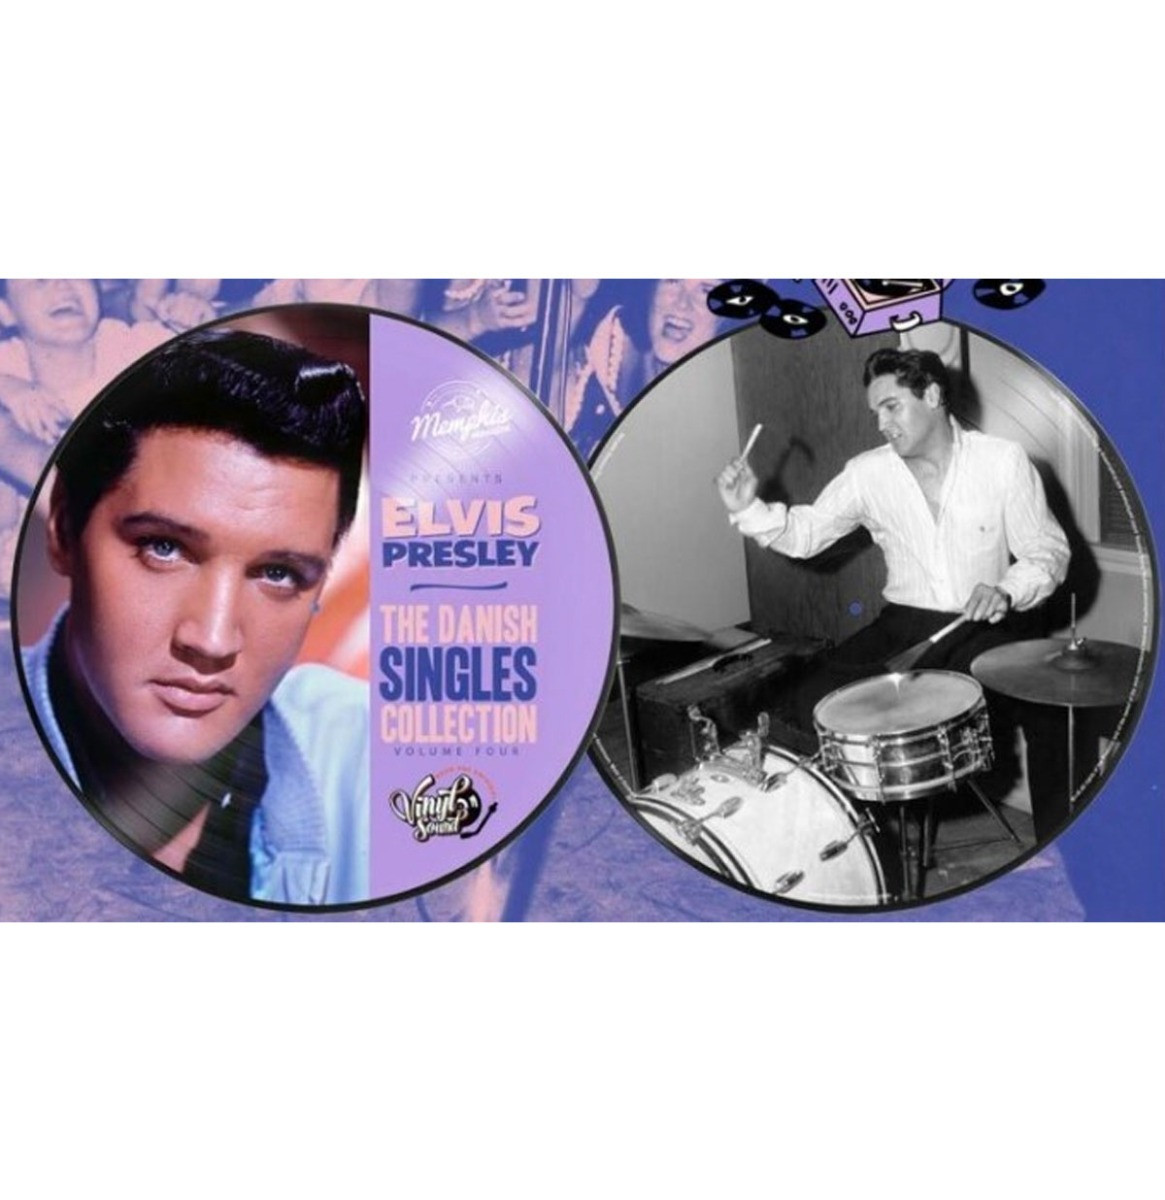 Elvis Presley - The Danish Singles Collection Vol. 4 Picture Disc